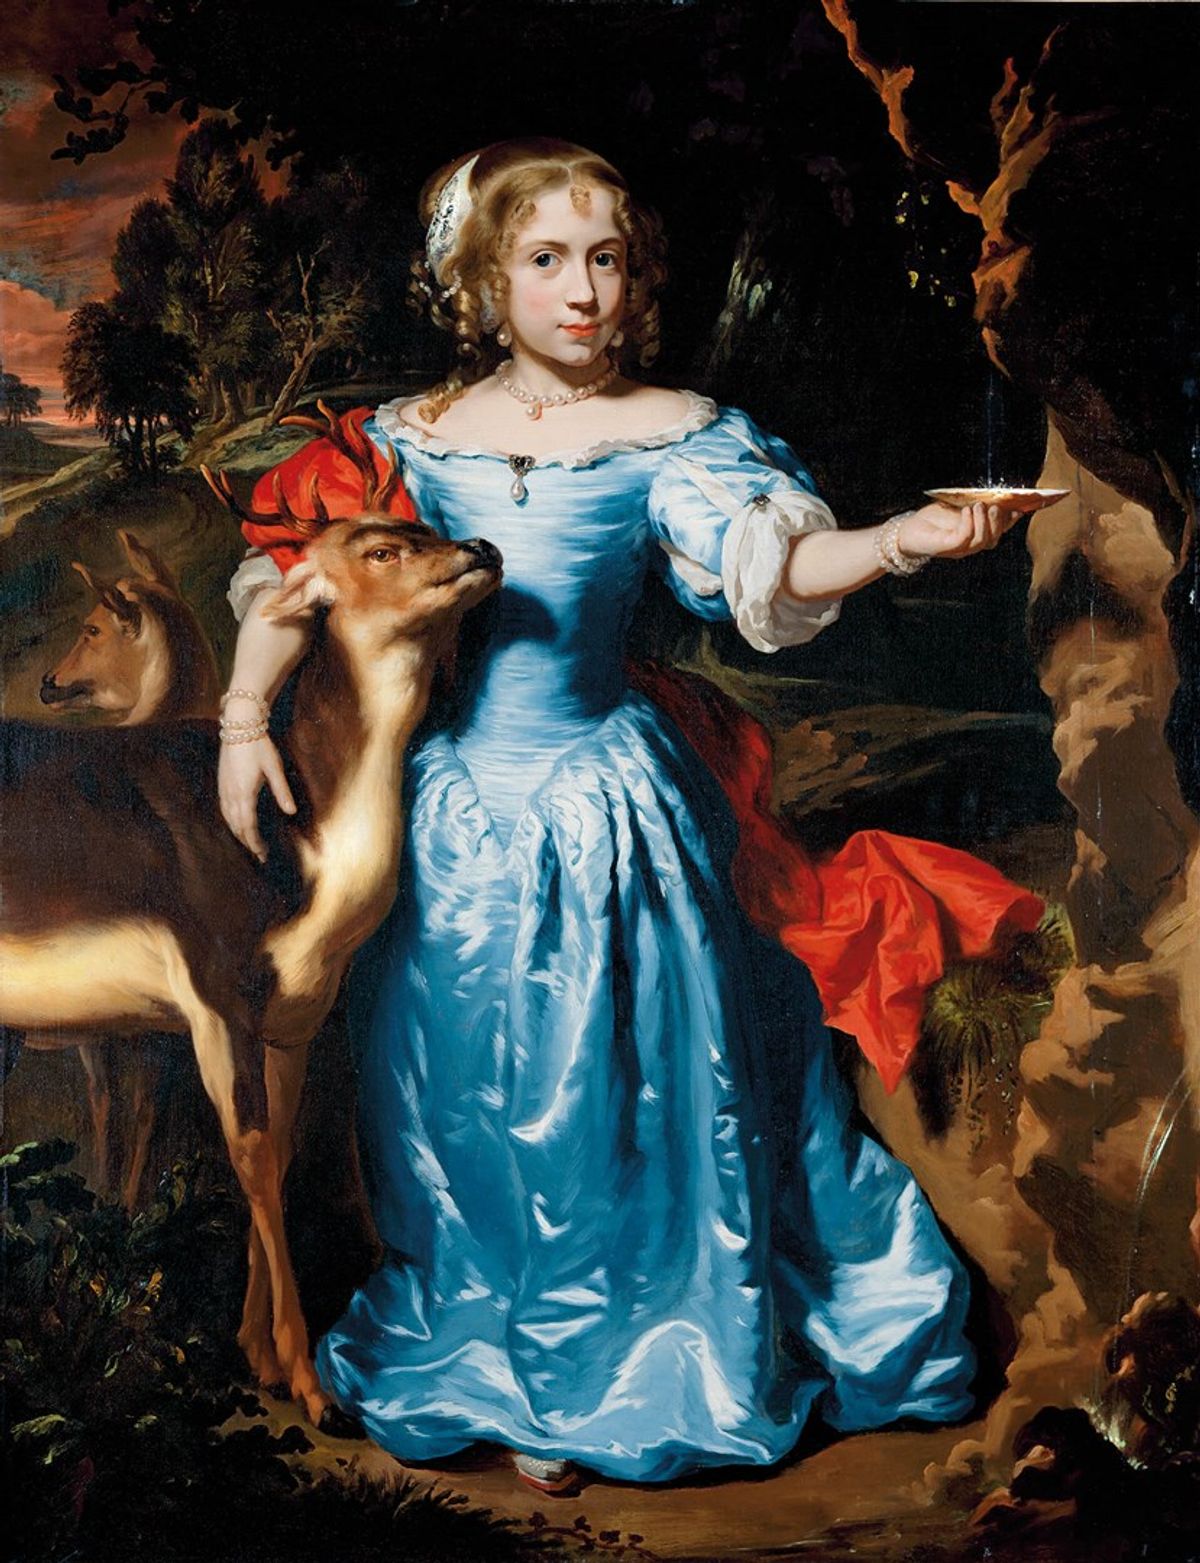 Nicolaes Maes, Portrait of a Girl with a Deer (around 1671) © 2006 Christie’s Images Limited